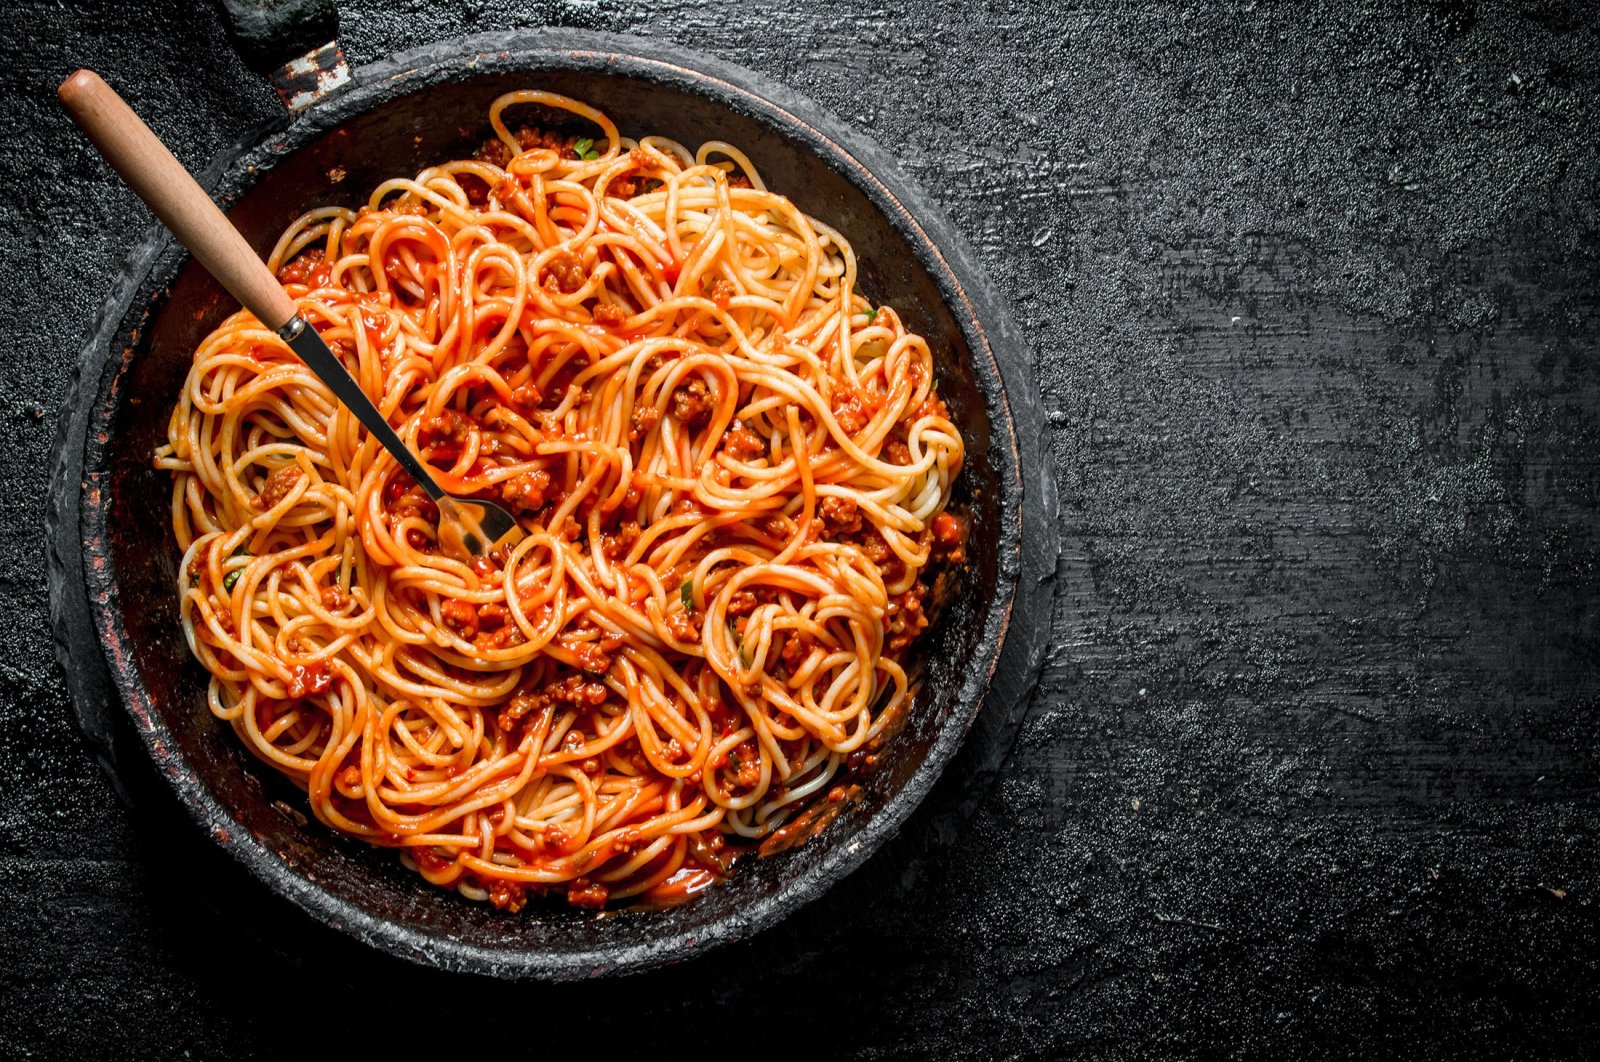 Pasta (whatever the shape) with Bolognese sauce remains a true classic. (Shutterstock Photo)